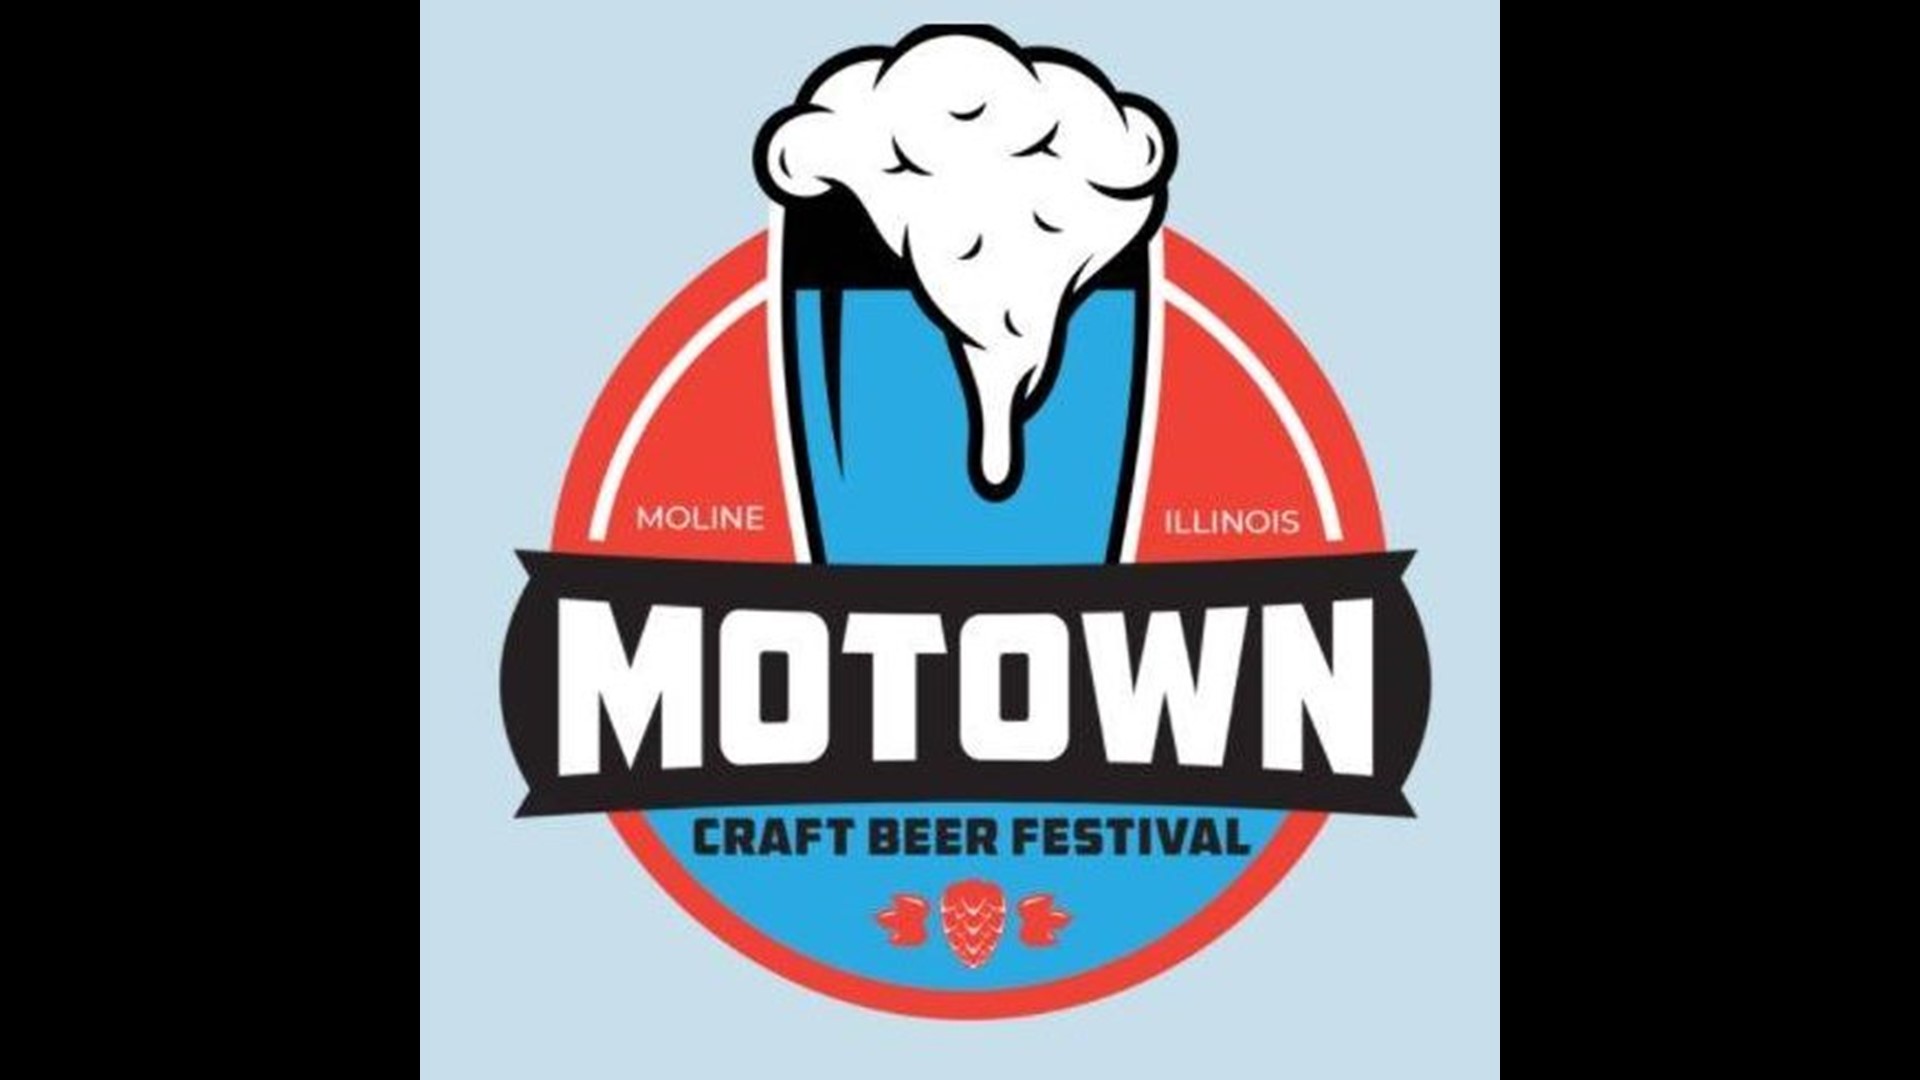 The festival will feature more than three dozen breweries and support four local charities on June 25.